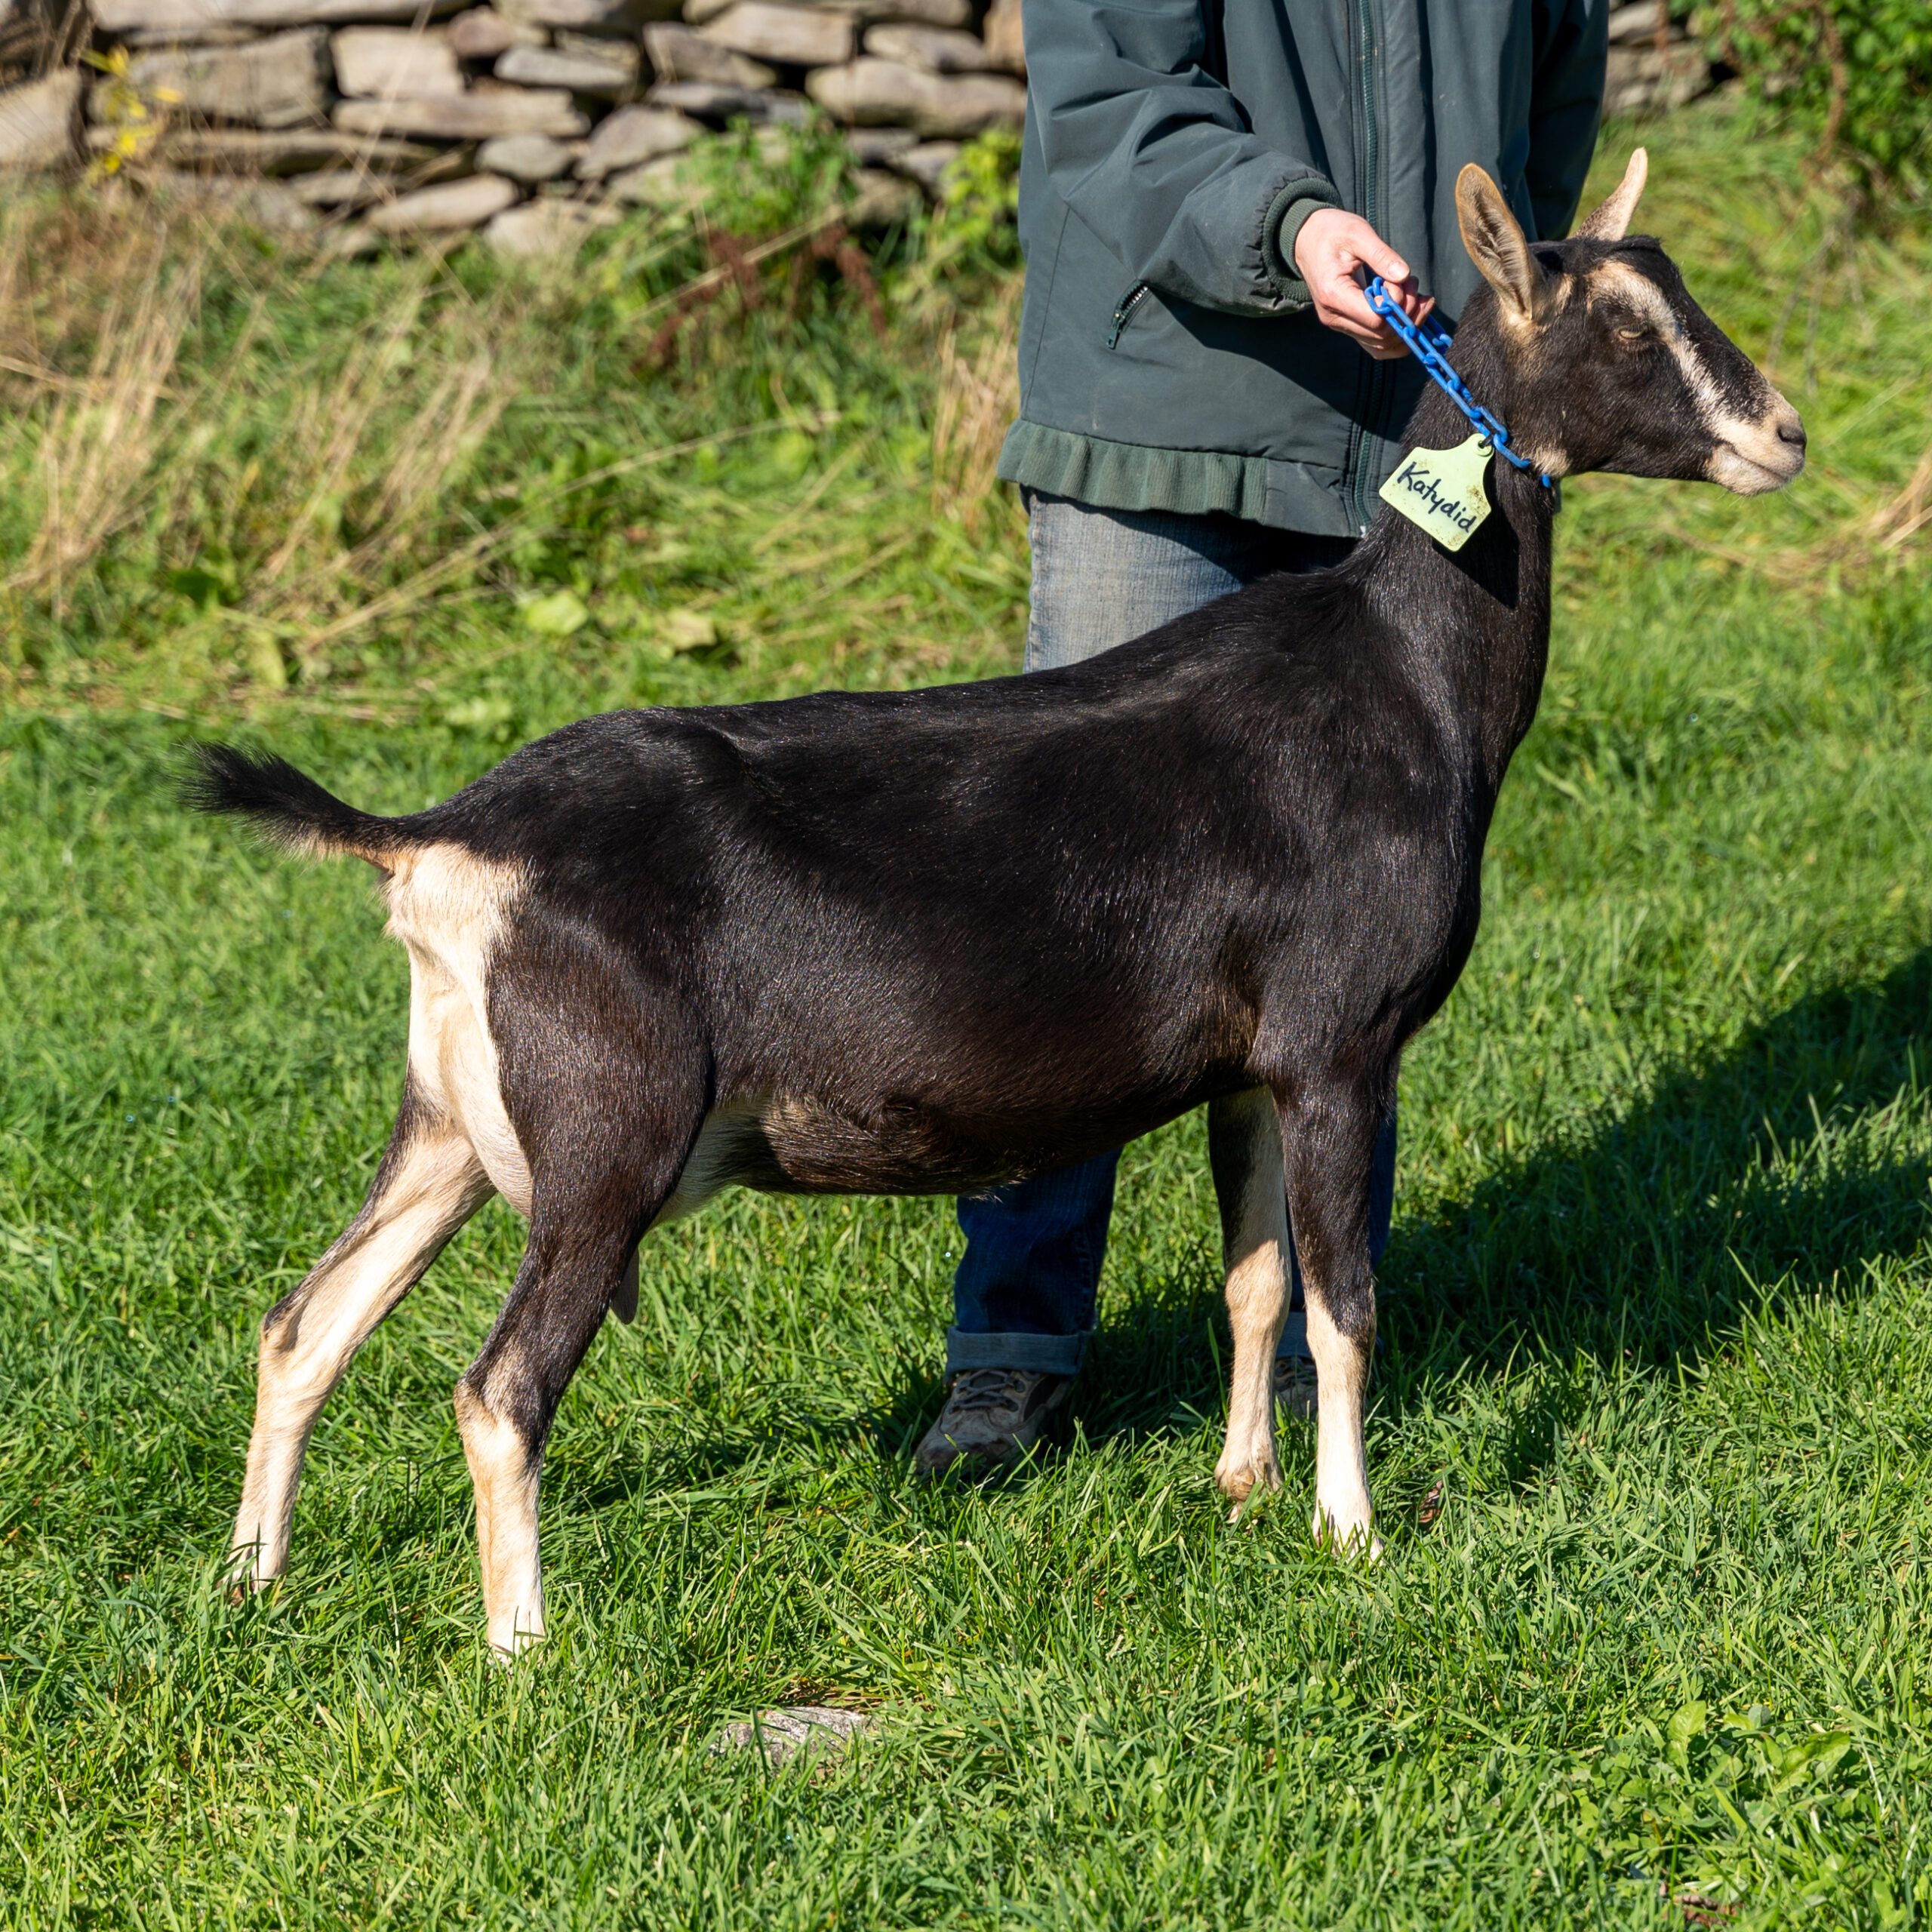 Female alpine goat with black coat and white feet standing on green grass with the farmer holding her collar in front of a rock wall in Somerville, Maine.